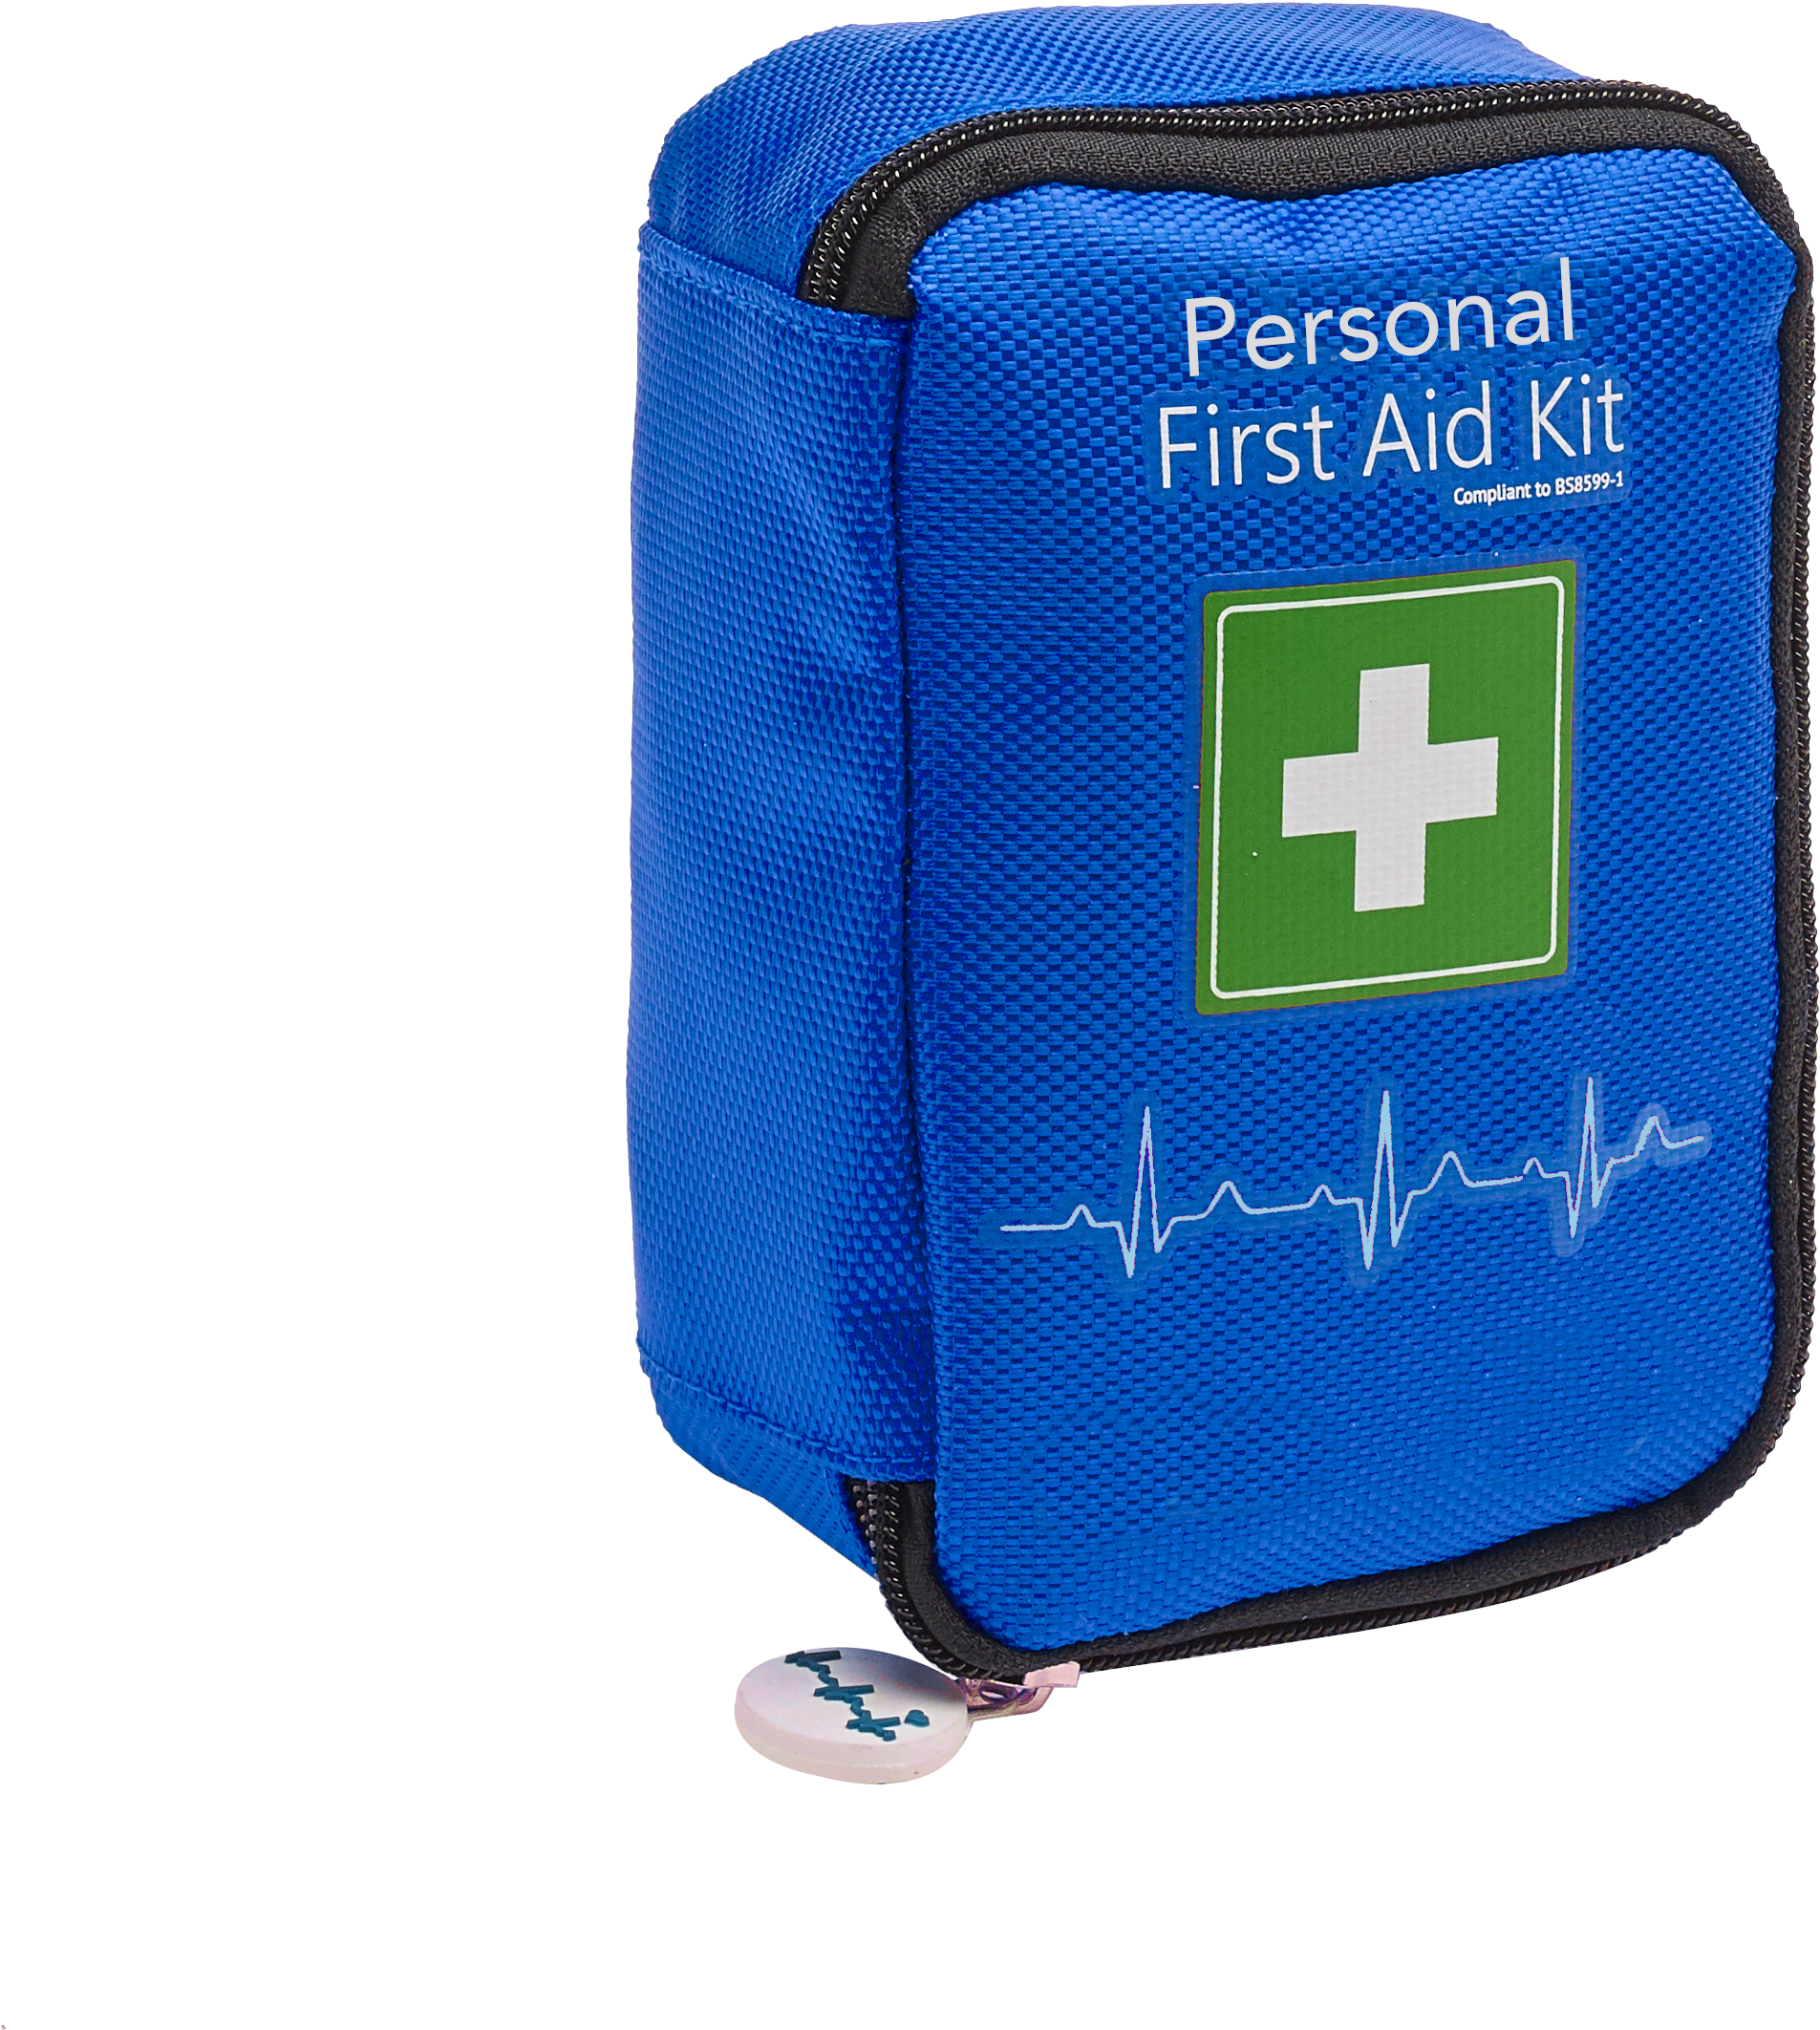 A Blue First Aid Kit With A White Button